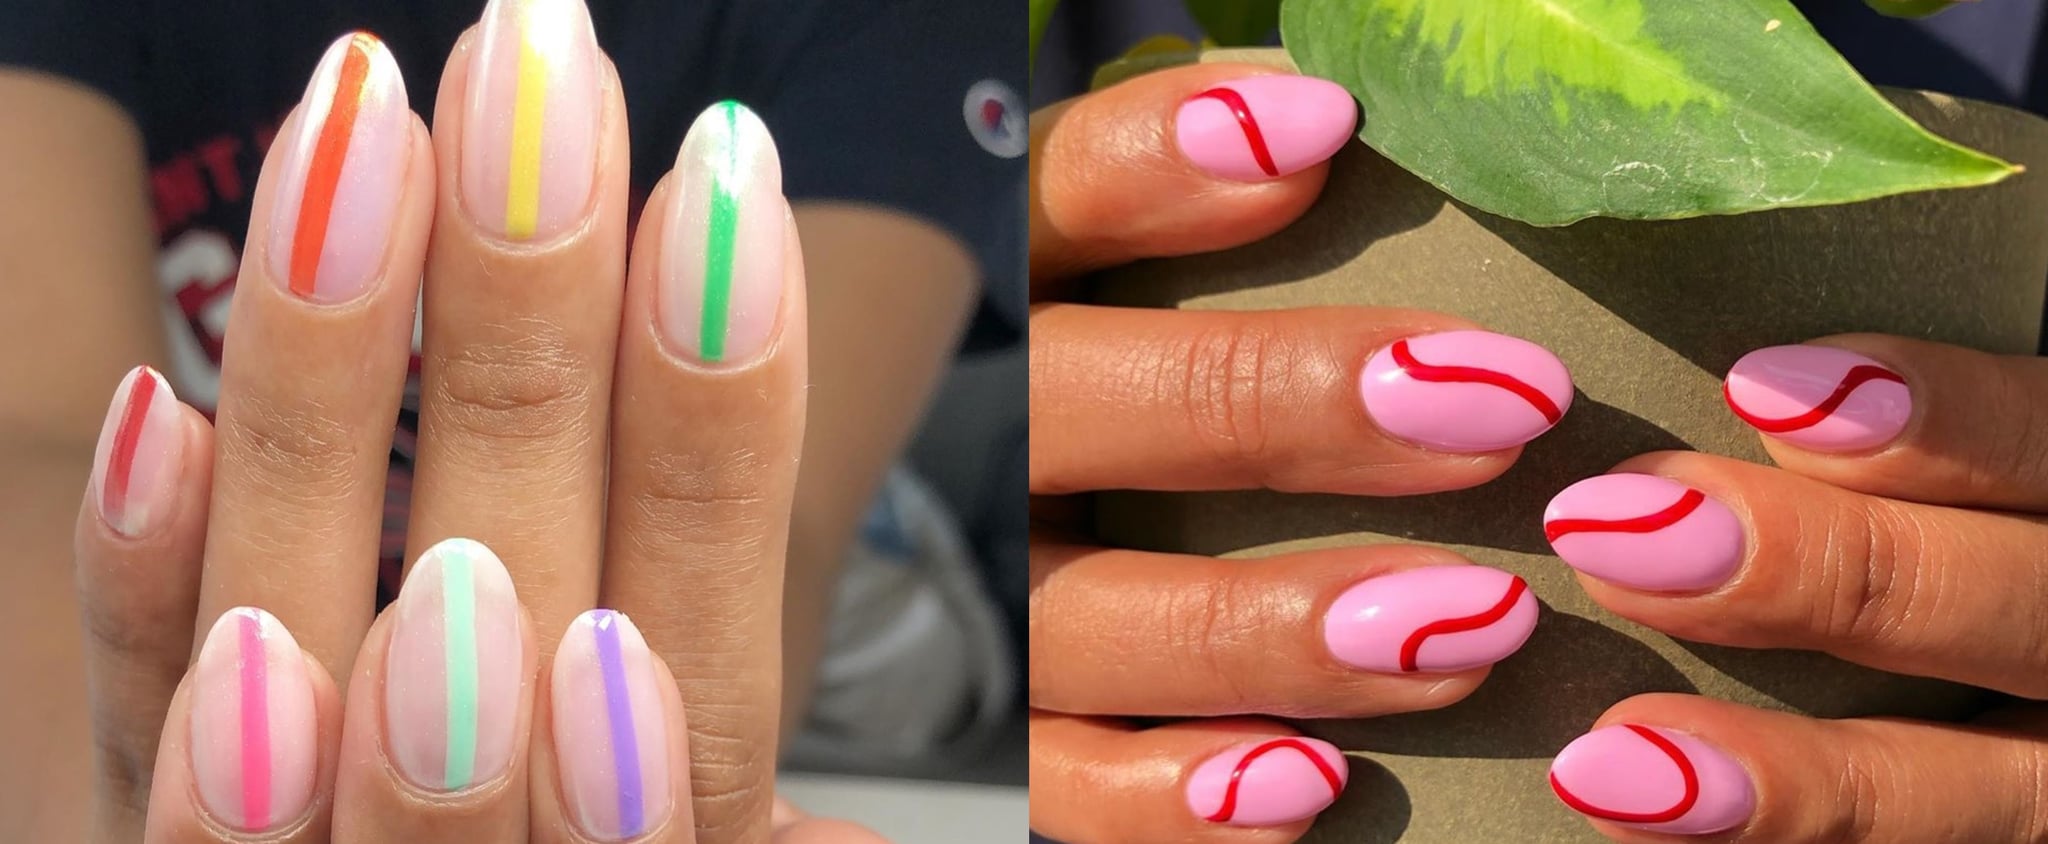 9. Minimalist Nail Designs with Straight Lines - wide 8